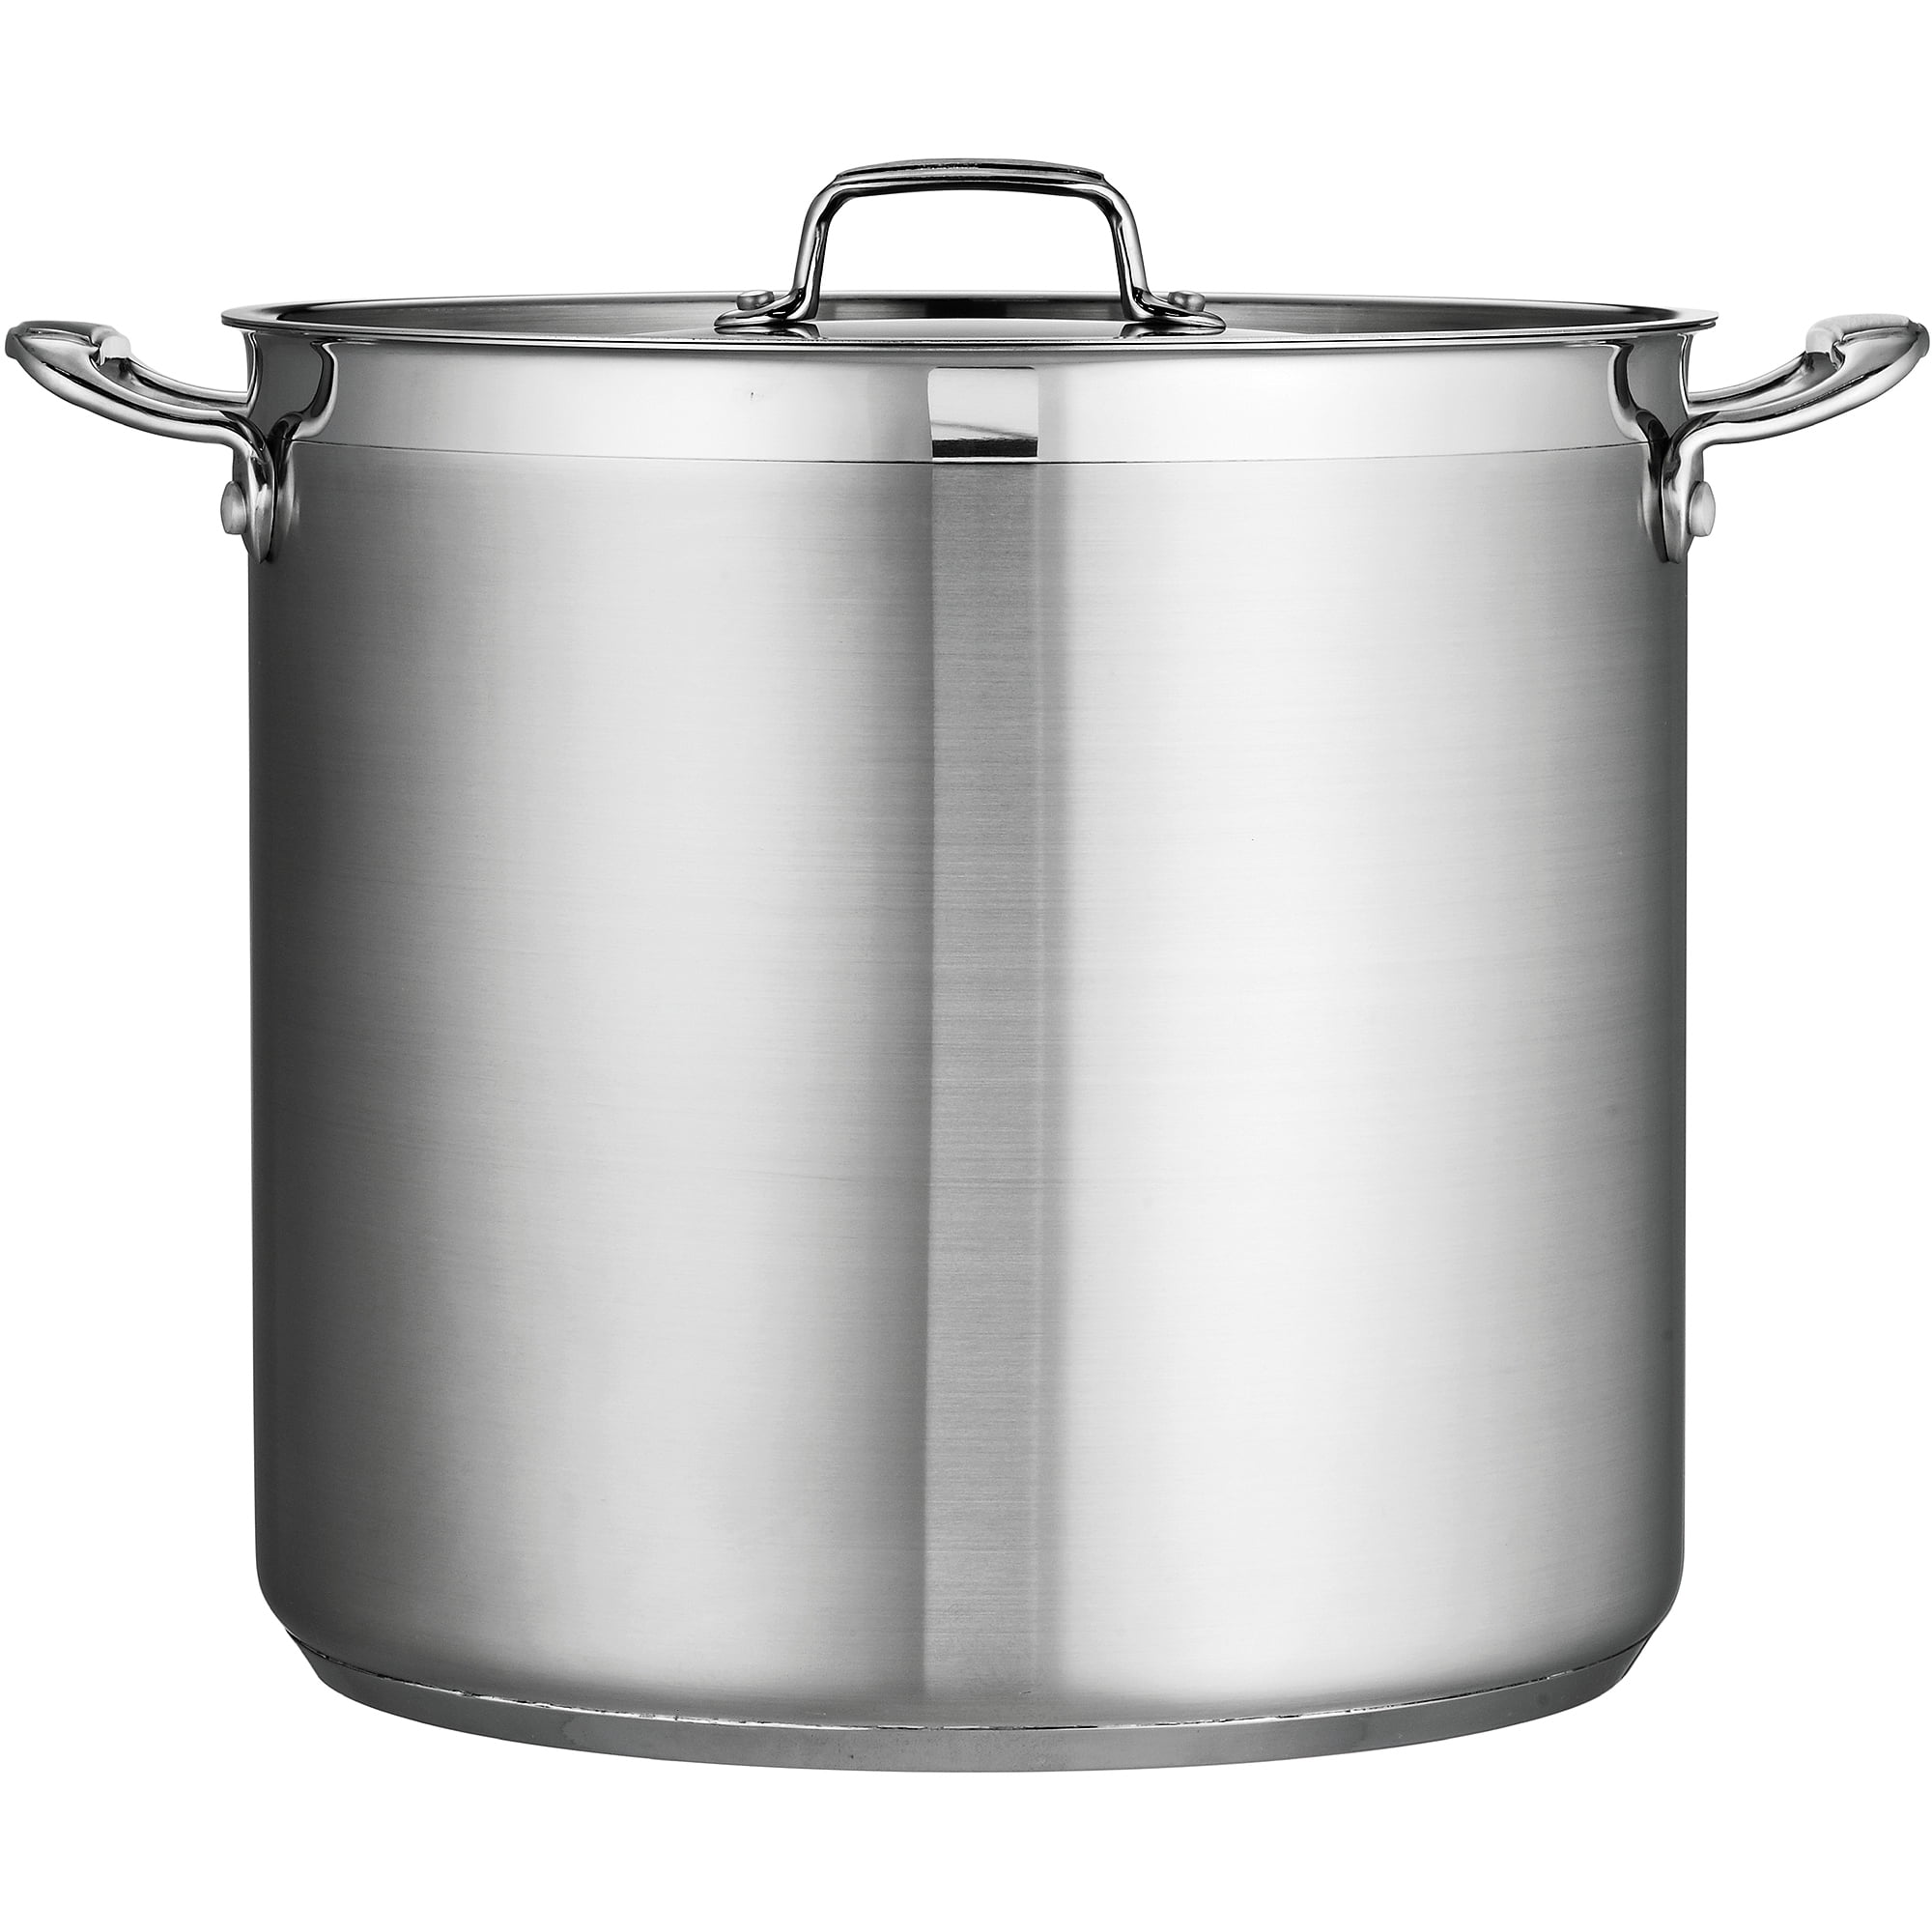 Tramontina Professional Stainless Steel Stockpot - The Peppermill